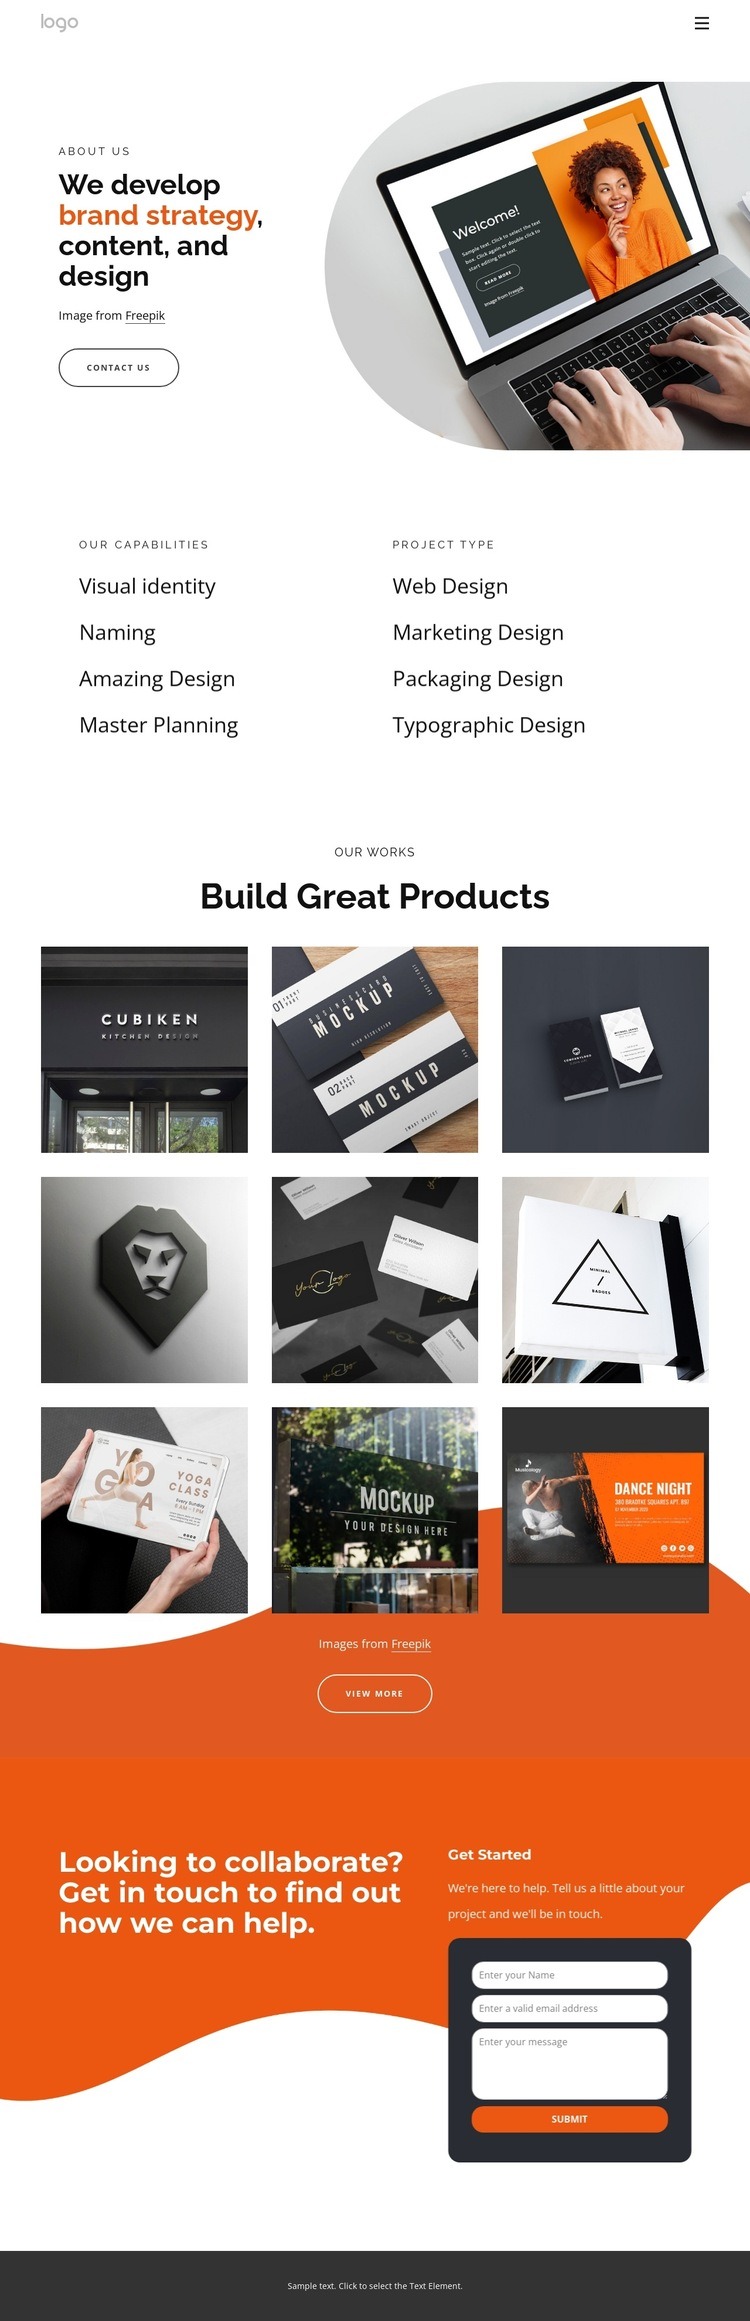 We create thoughtful experiences for humans Squarespace Template Alternative